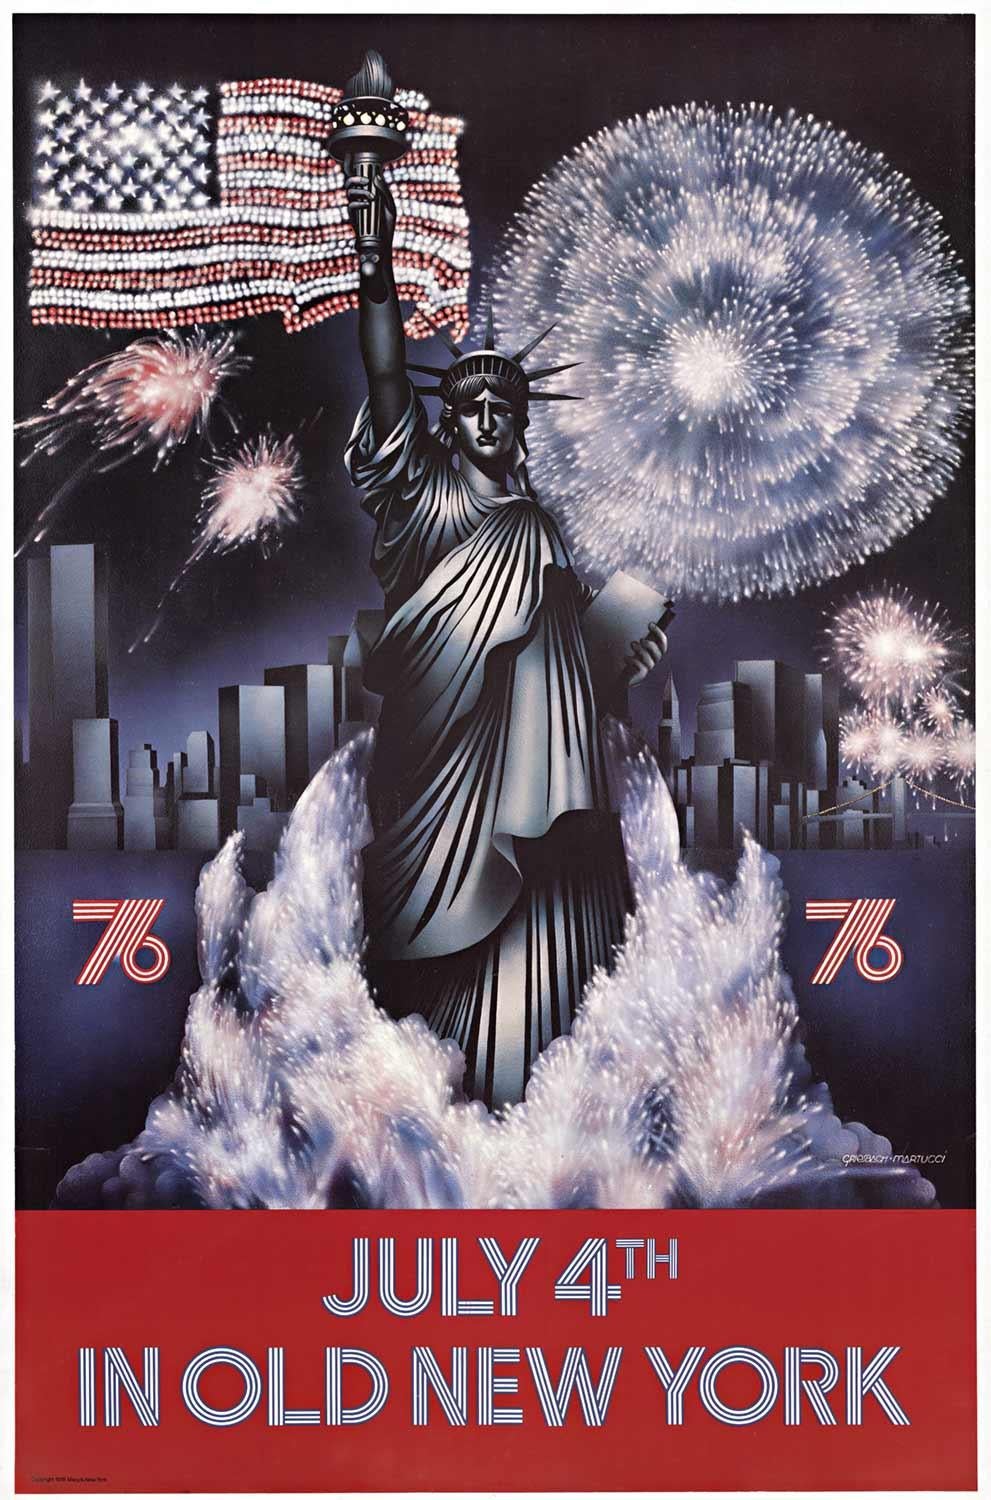 Griesbach & Martucci  Landscape Print - Original "July 4th in Old New York" Bicentennial vintage poster  1976